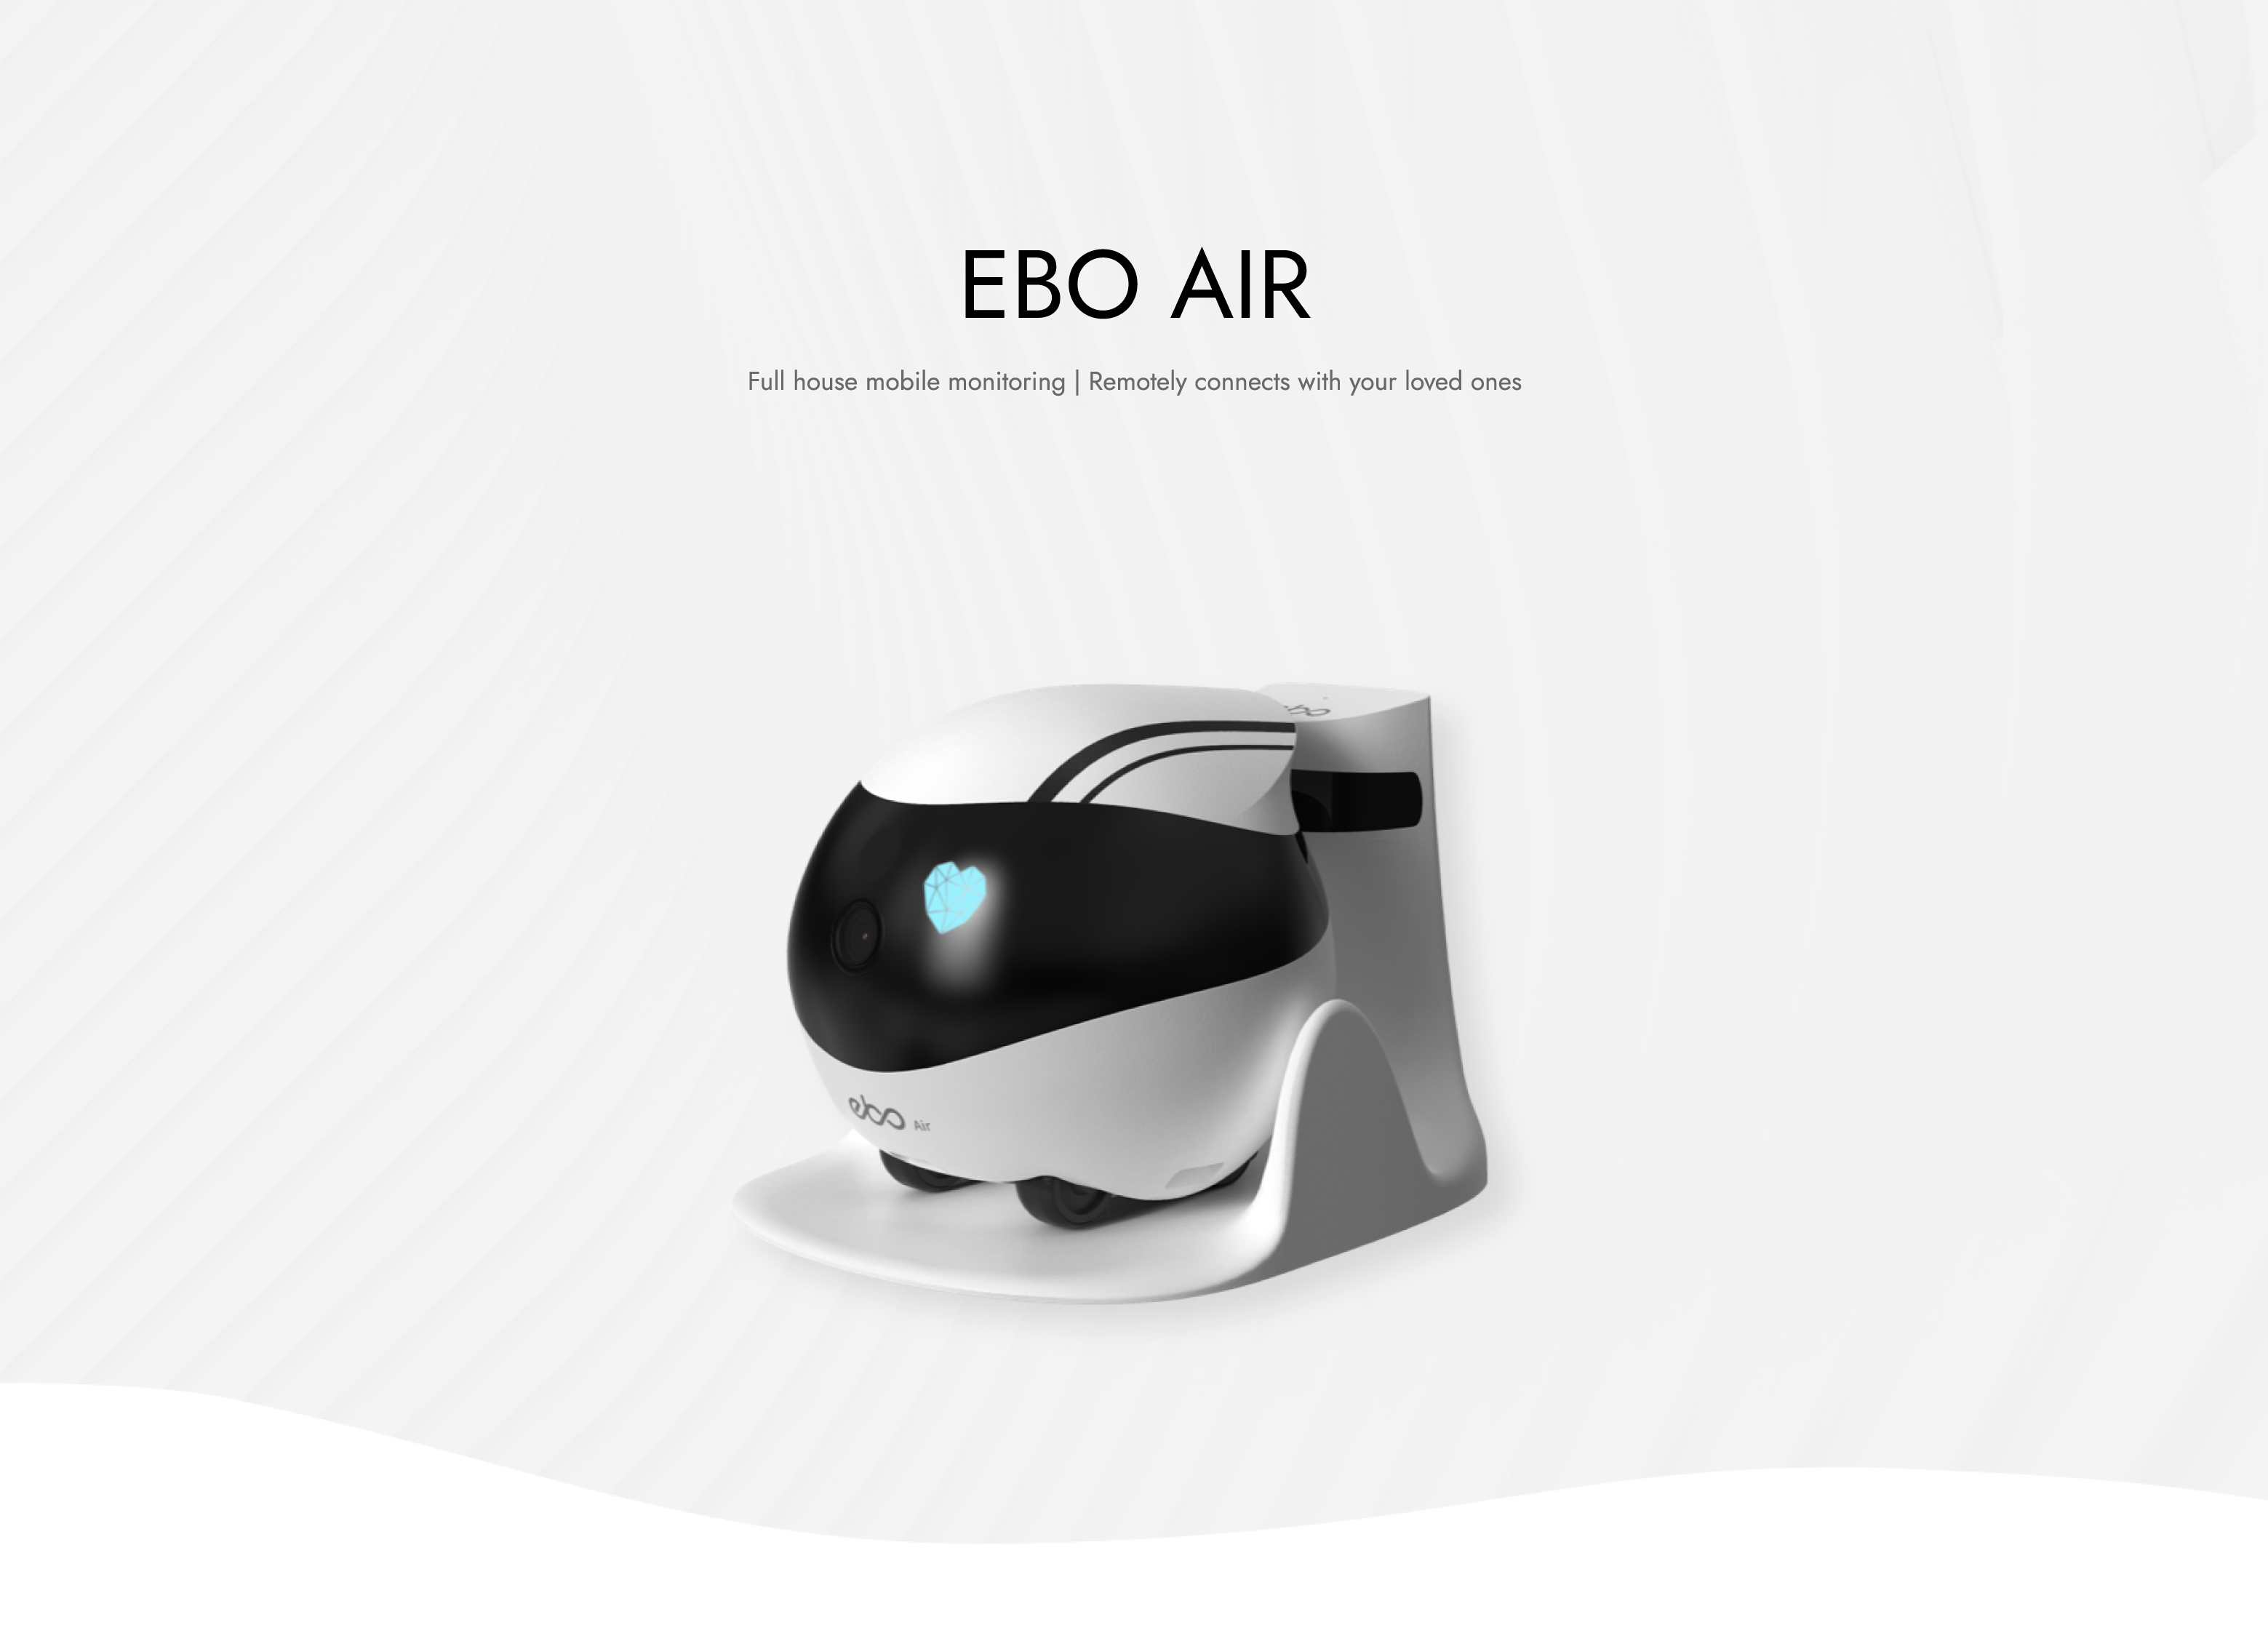 ENABOT EBO SE / AIR Smart WIFI Companion Family Robot Monitor FHD With  Audio Security Camera